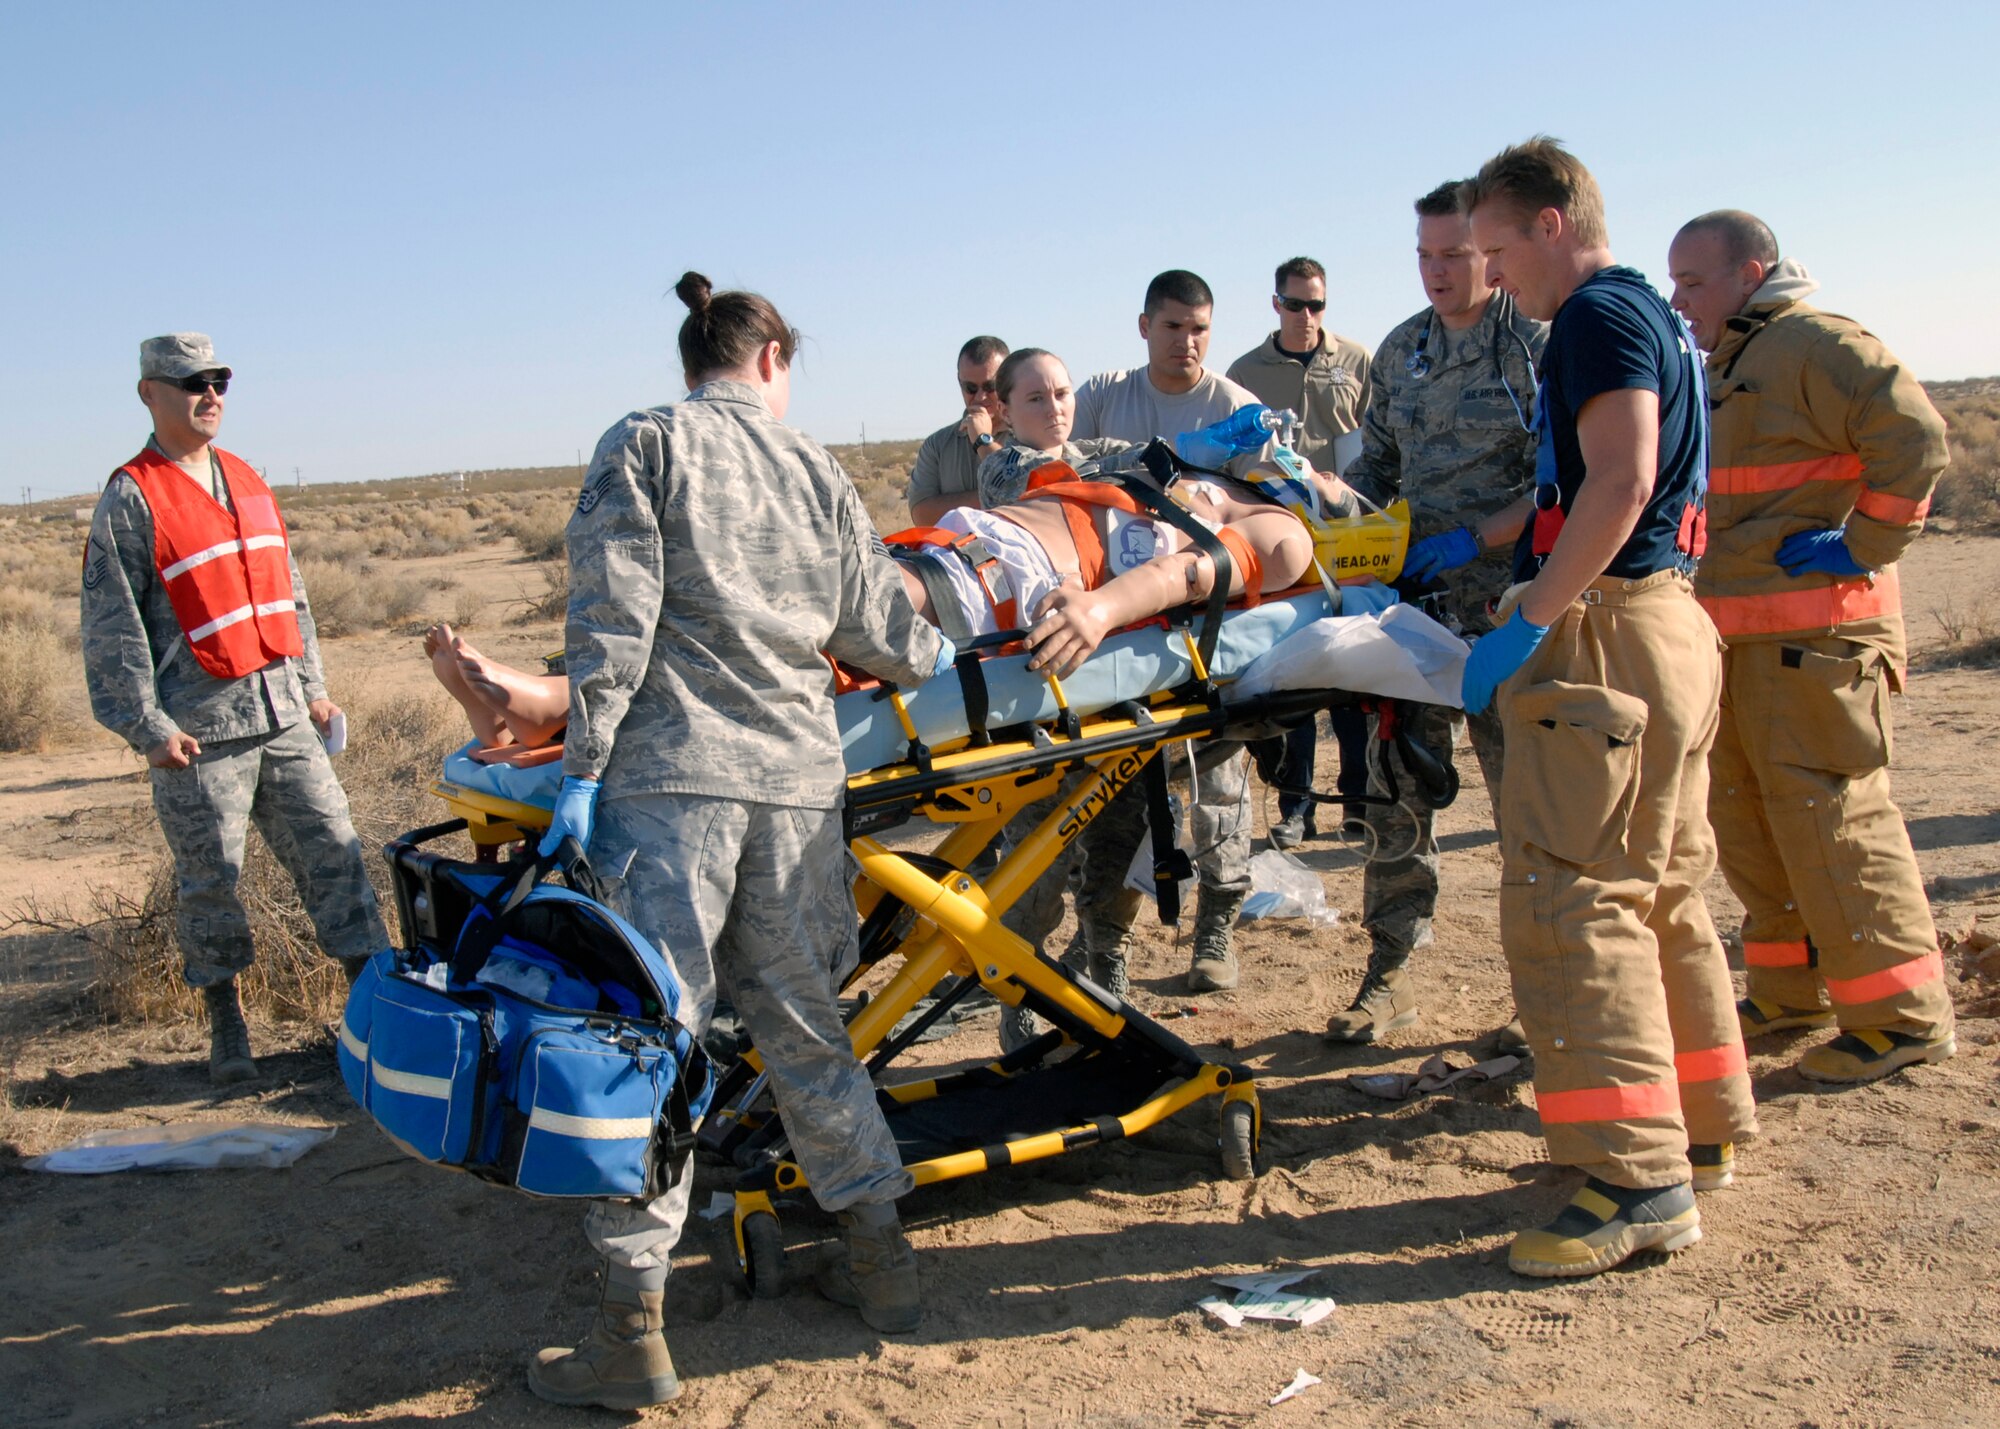 First responders prepare to transport the METIman mannequin during exercise Desert Wind 13-01 after demonstrating their emergency response capability to the Exercise Evaluation Team Oct. 1. 